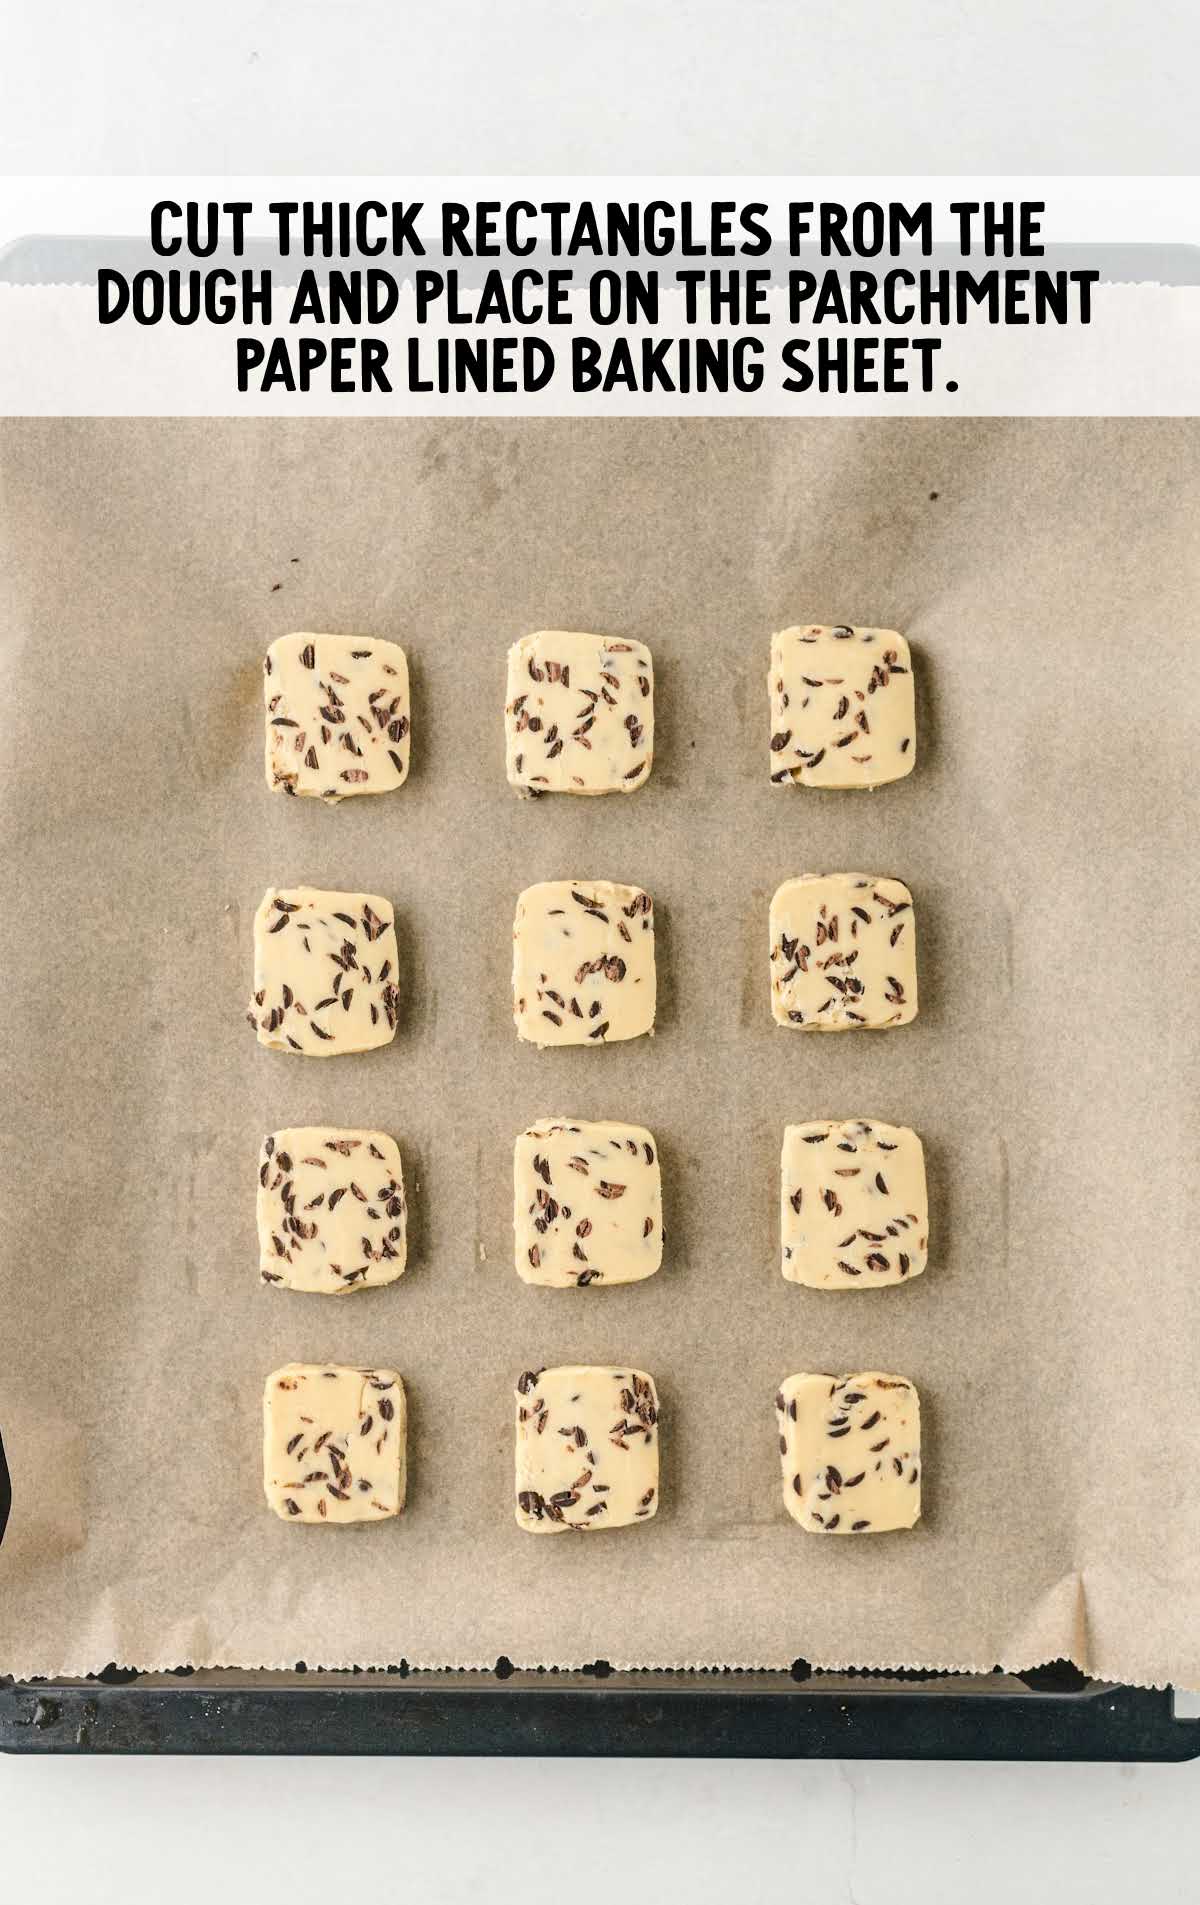 dough cut into rectangles and placed on a parchment paper lined baking sheet